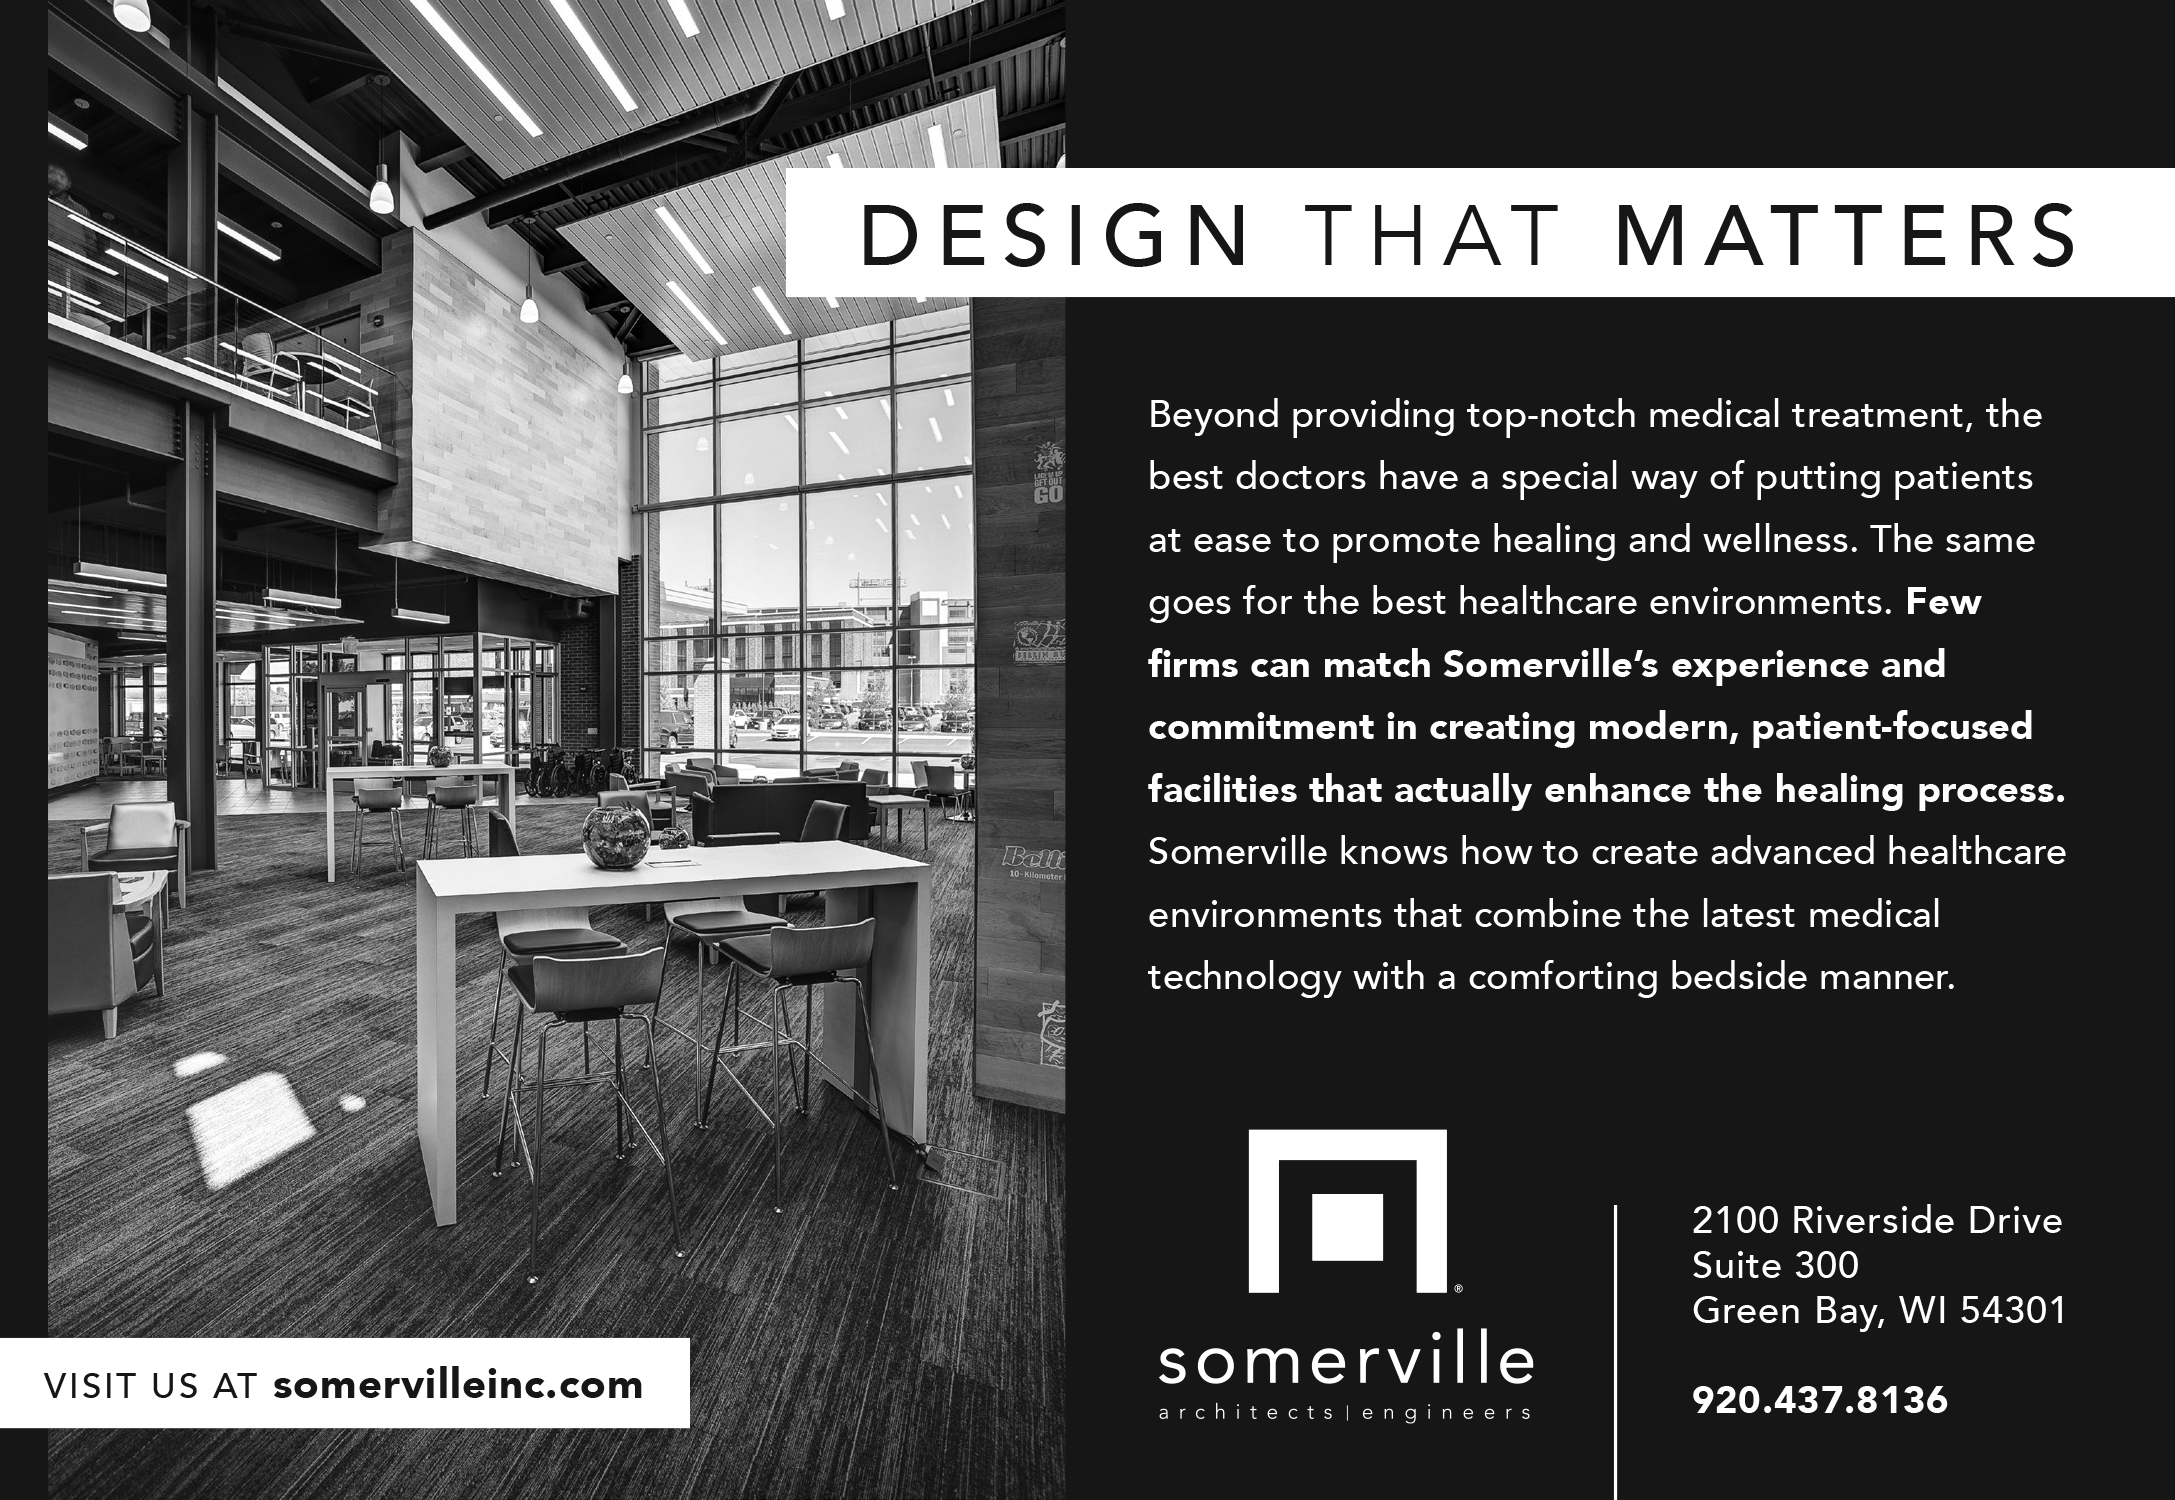 Somerville Architects & Engineers